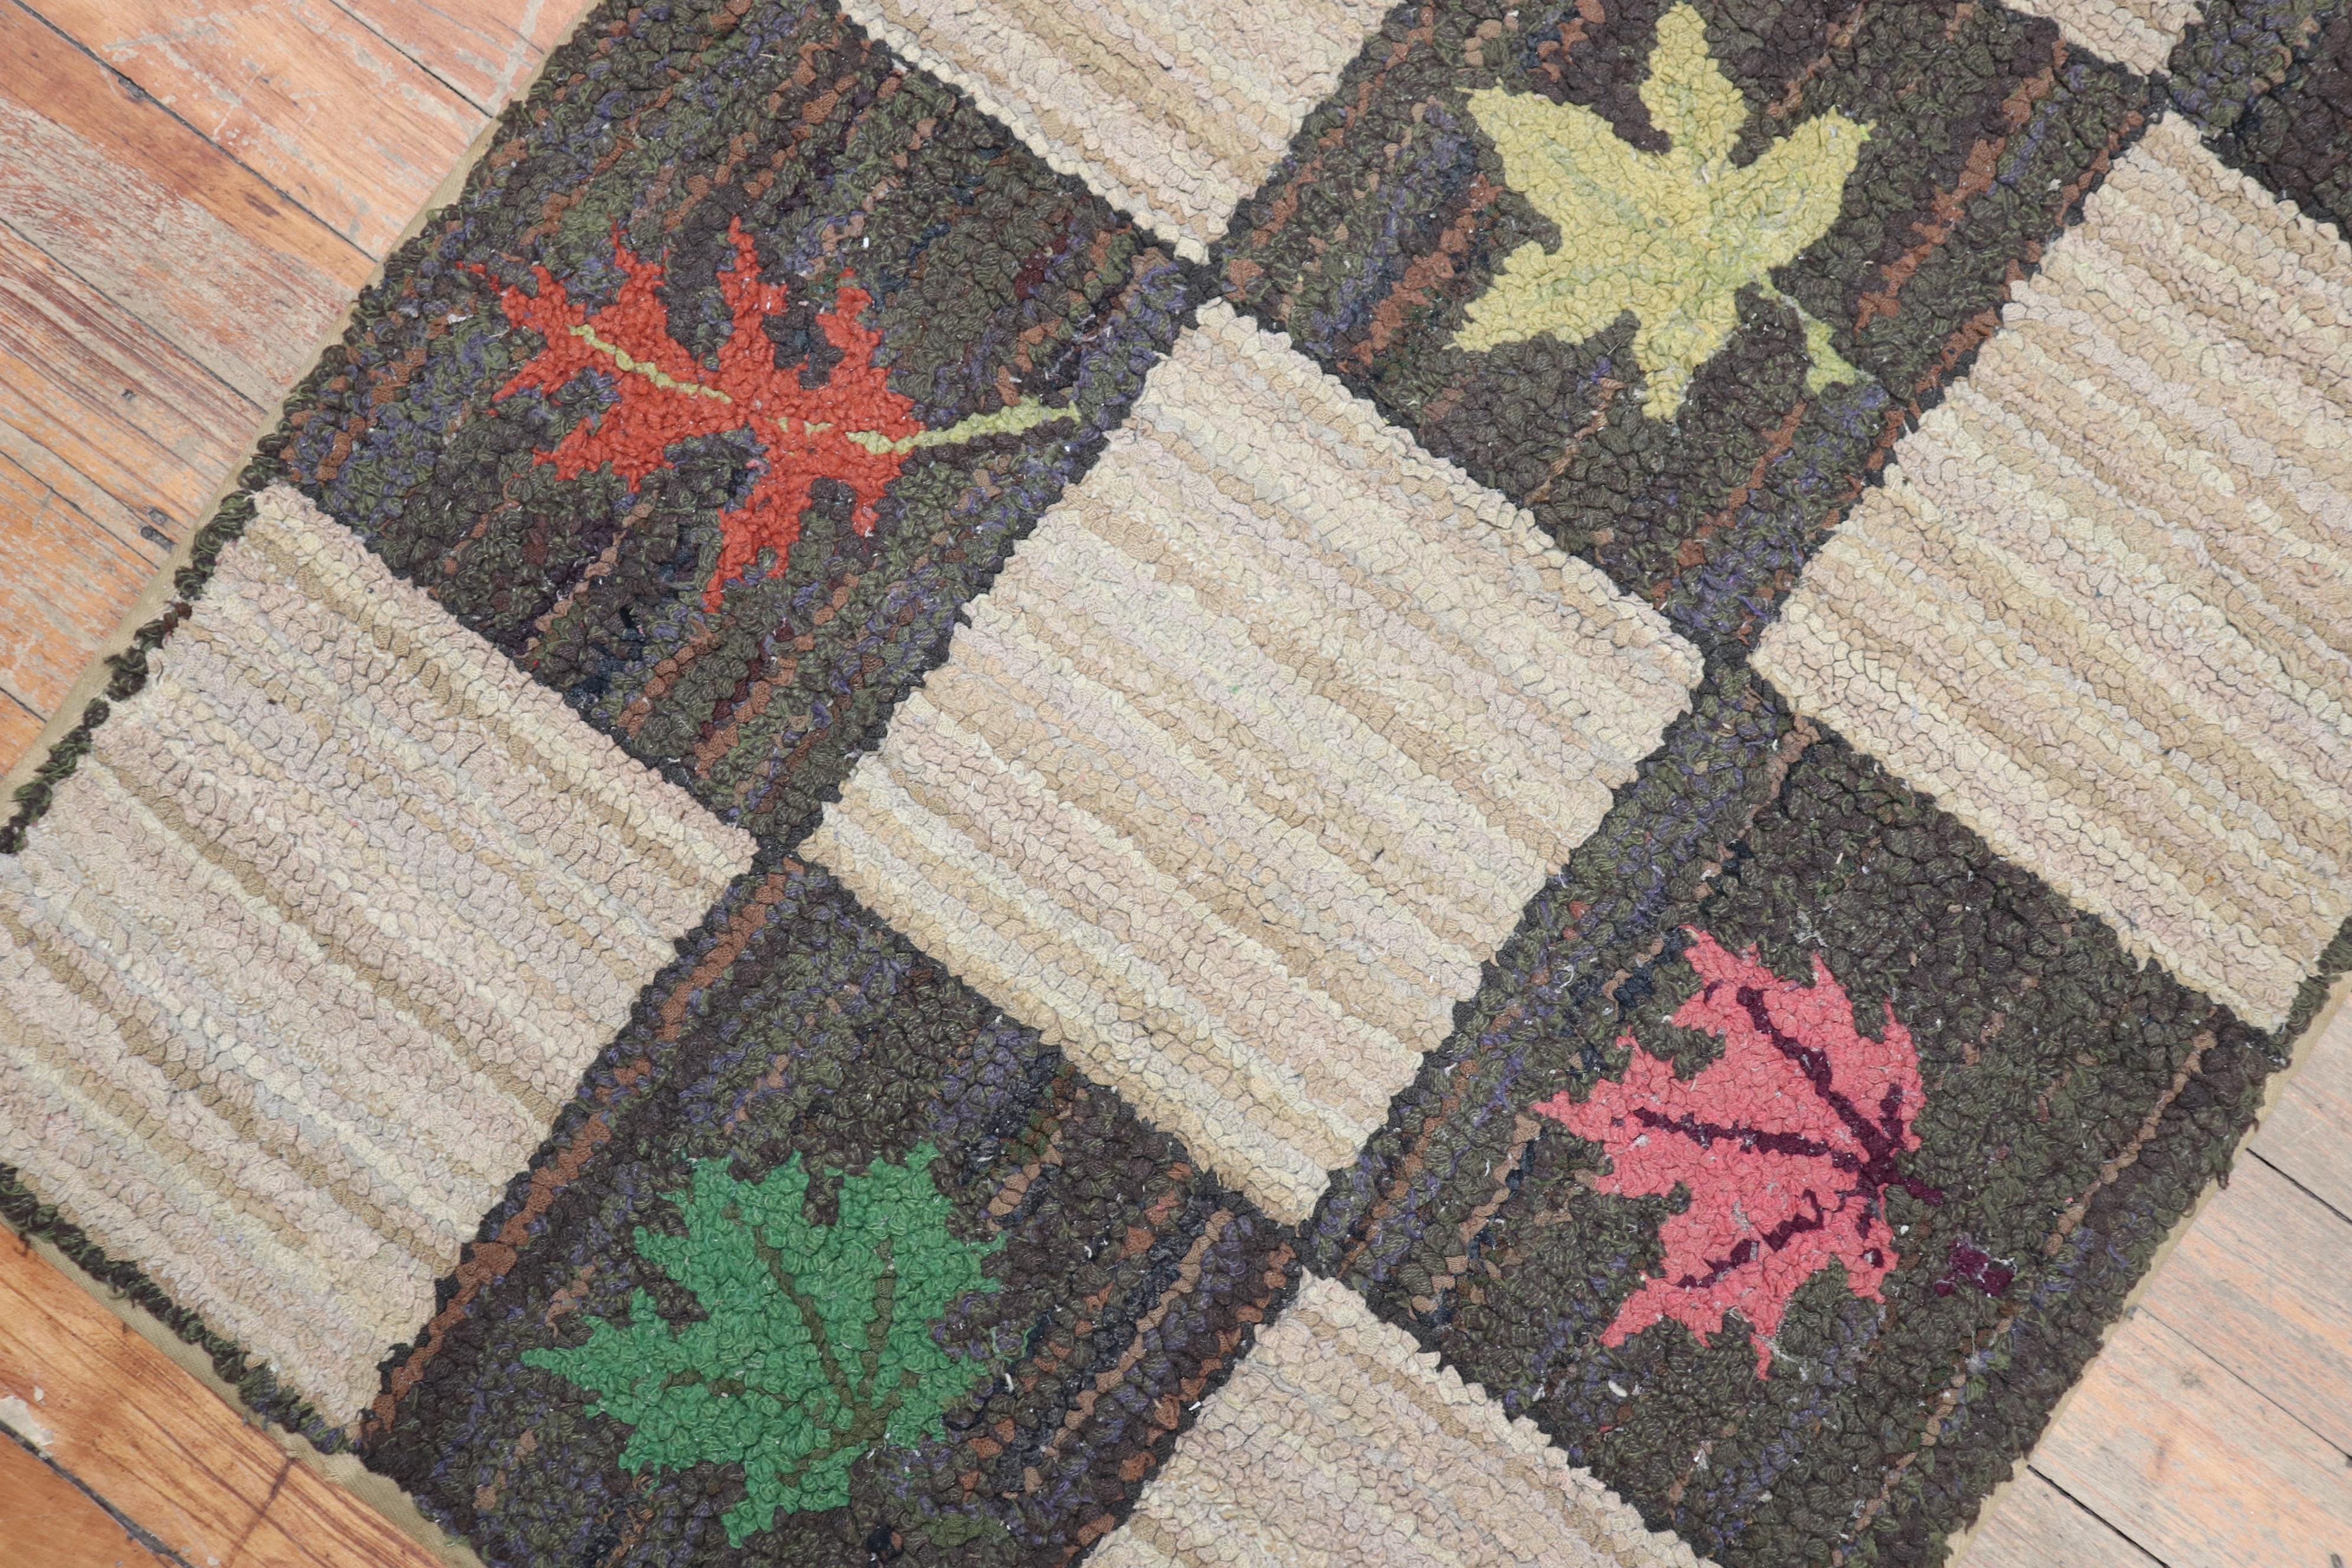 A handmade decorative American hooked rug from the middle of the 20th century with an assortment of leaves on a repetitive box pattern on a gray and beige ground

Measures: 2' x 2'11'.